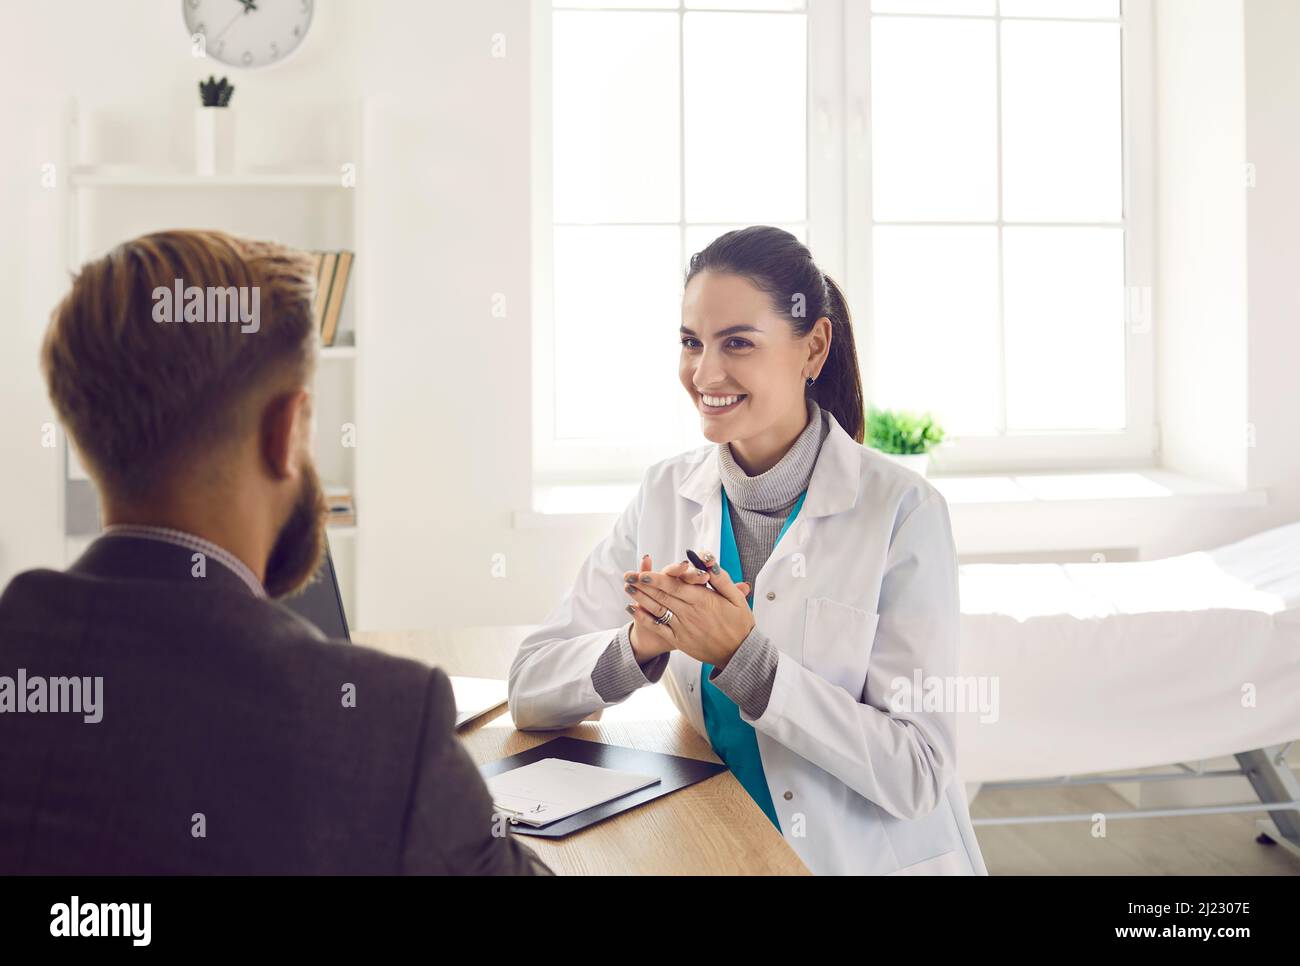 Smiling female doctor consult male patient Stock Photo